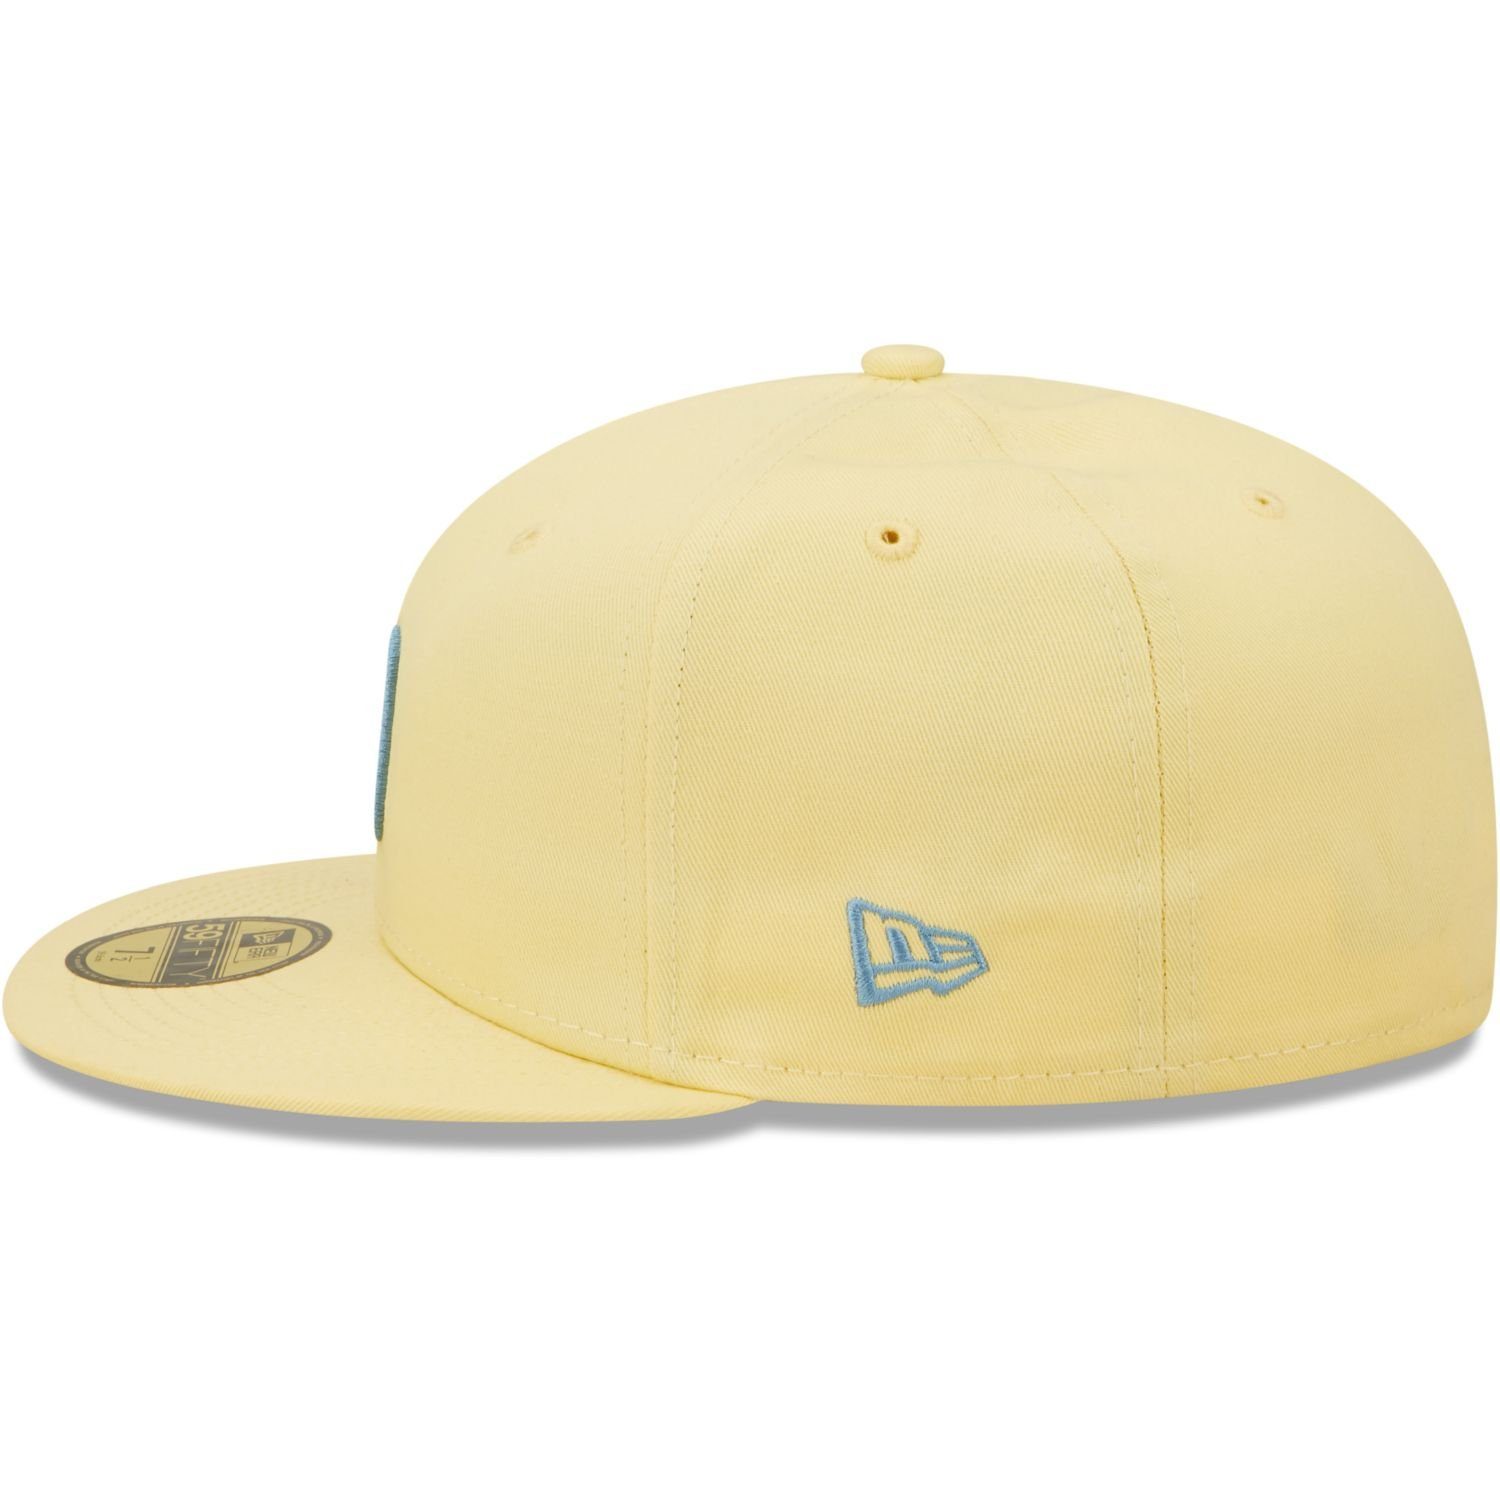 Era Padres San Cap COOPERSTOWN New 59Fifty Fitted Diego